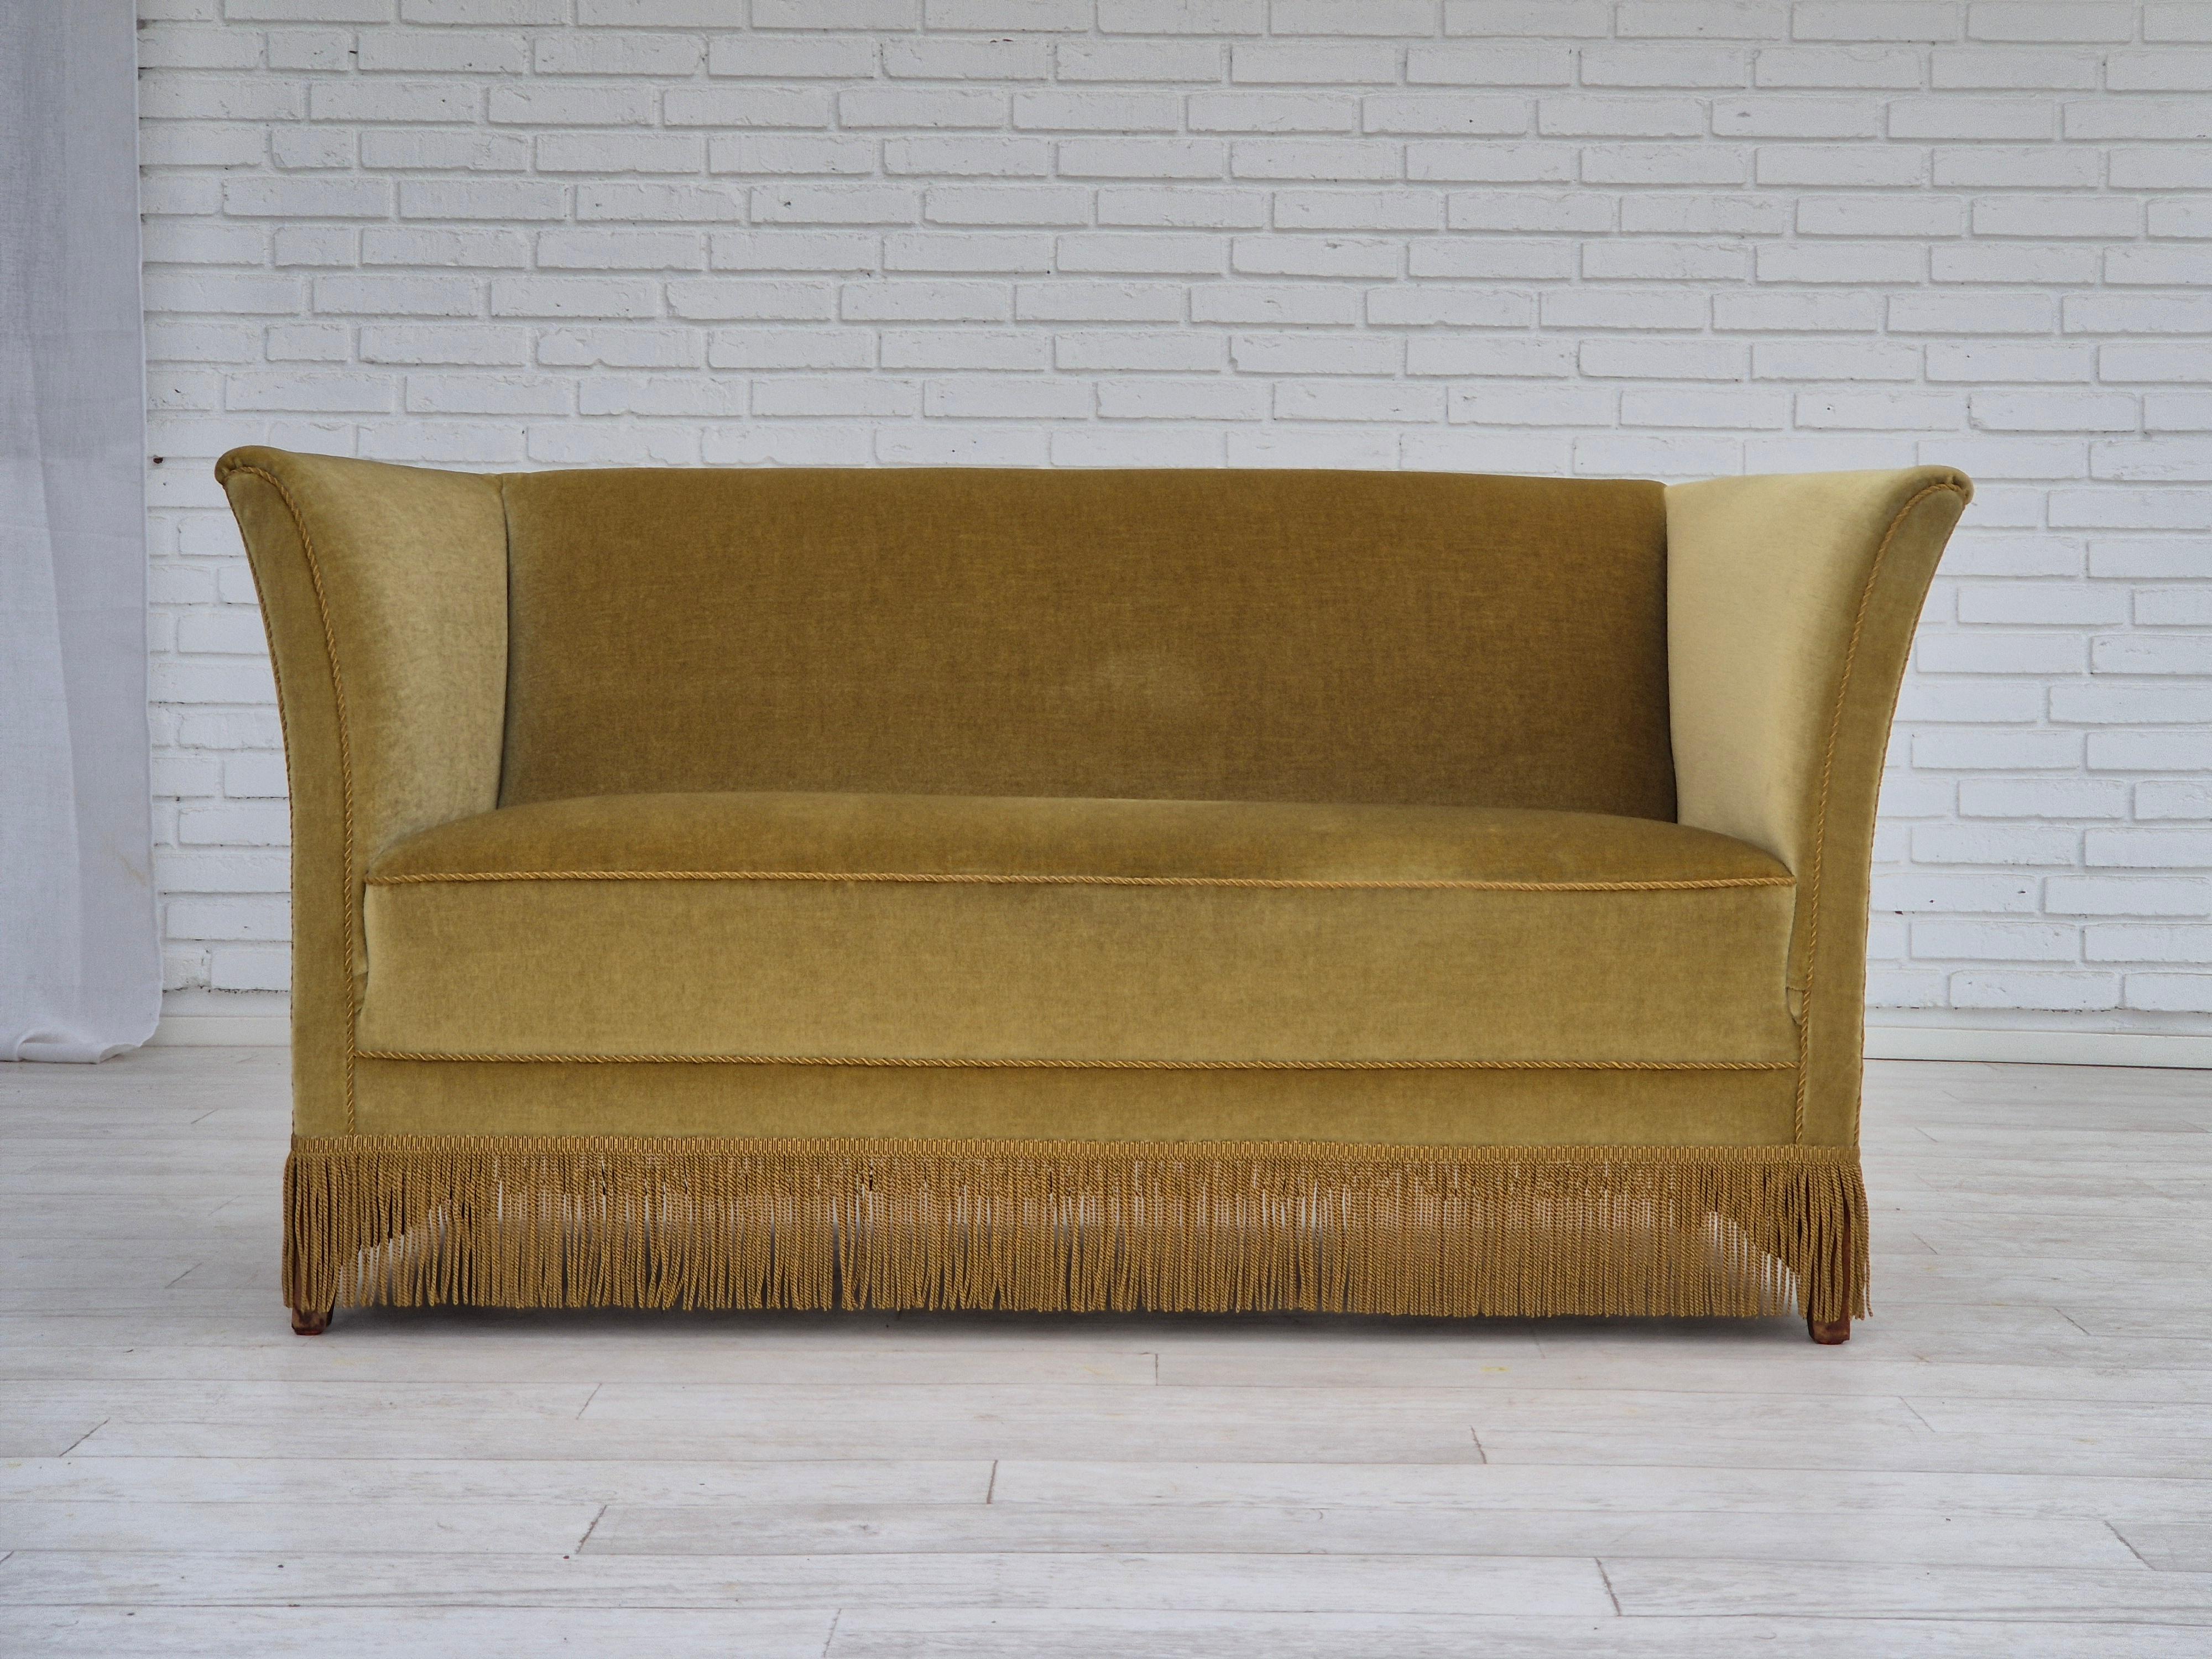 1970s, Danish design, 2 seater sofa in original very good condition: no smells and no stains. Original light green furniture velour, beech wood legs, springs in the seat. Manufactured by Danish furniture manufacturer in about 1970s.